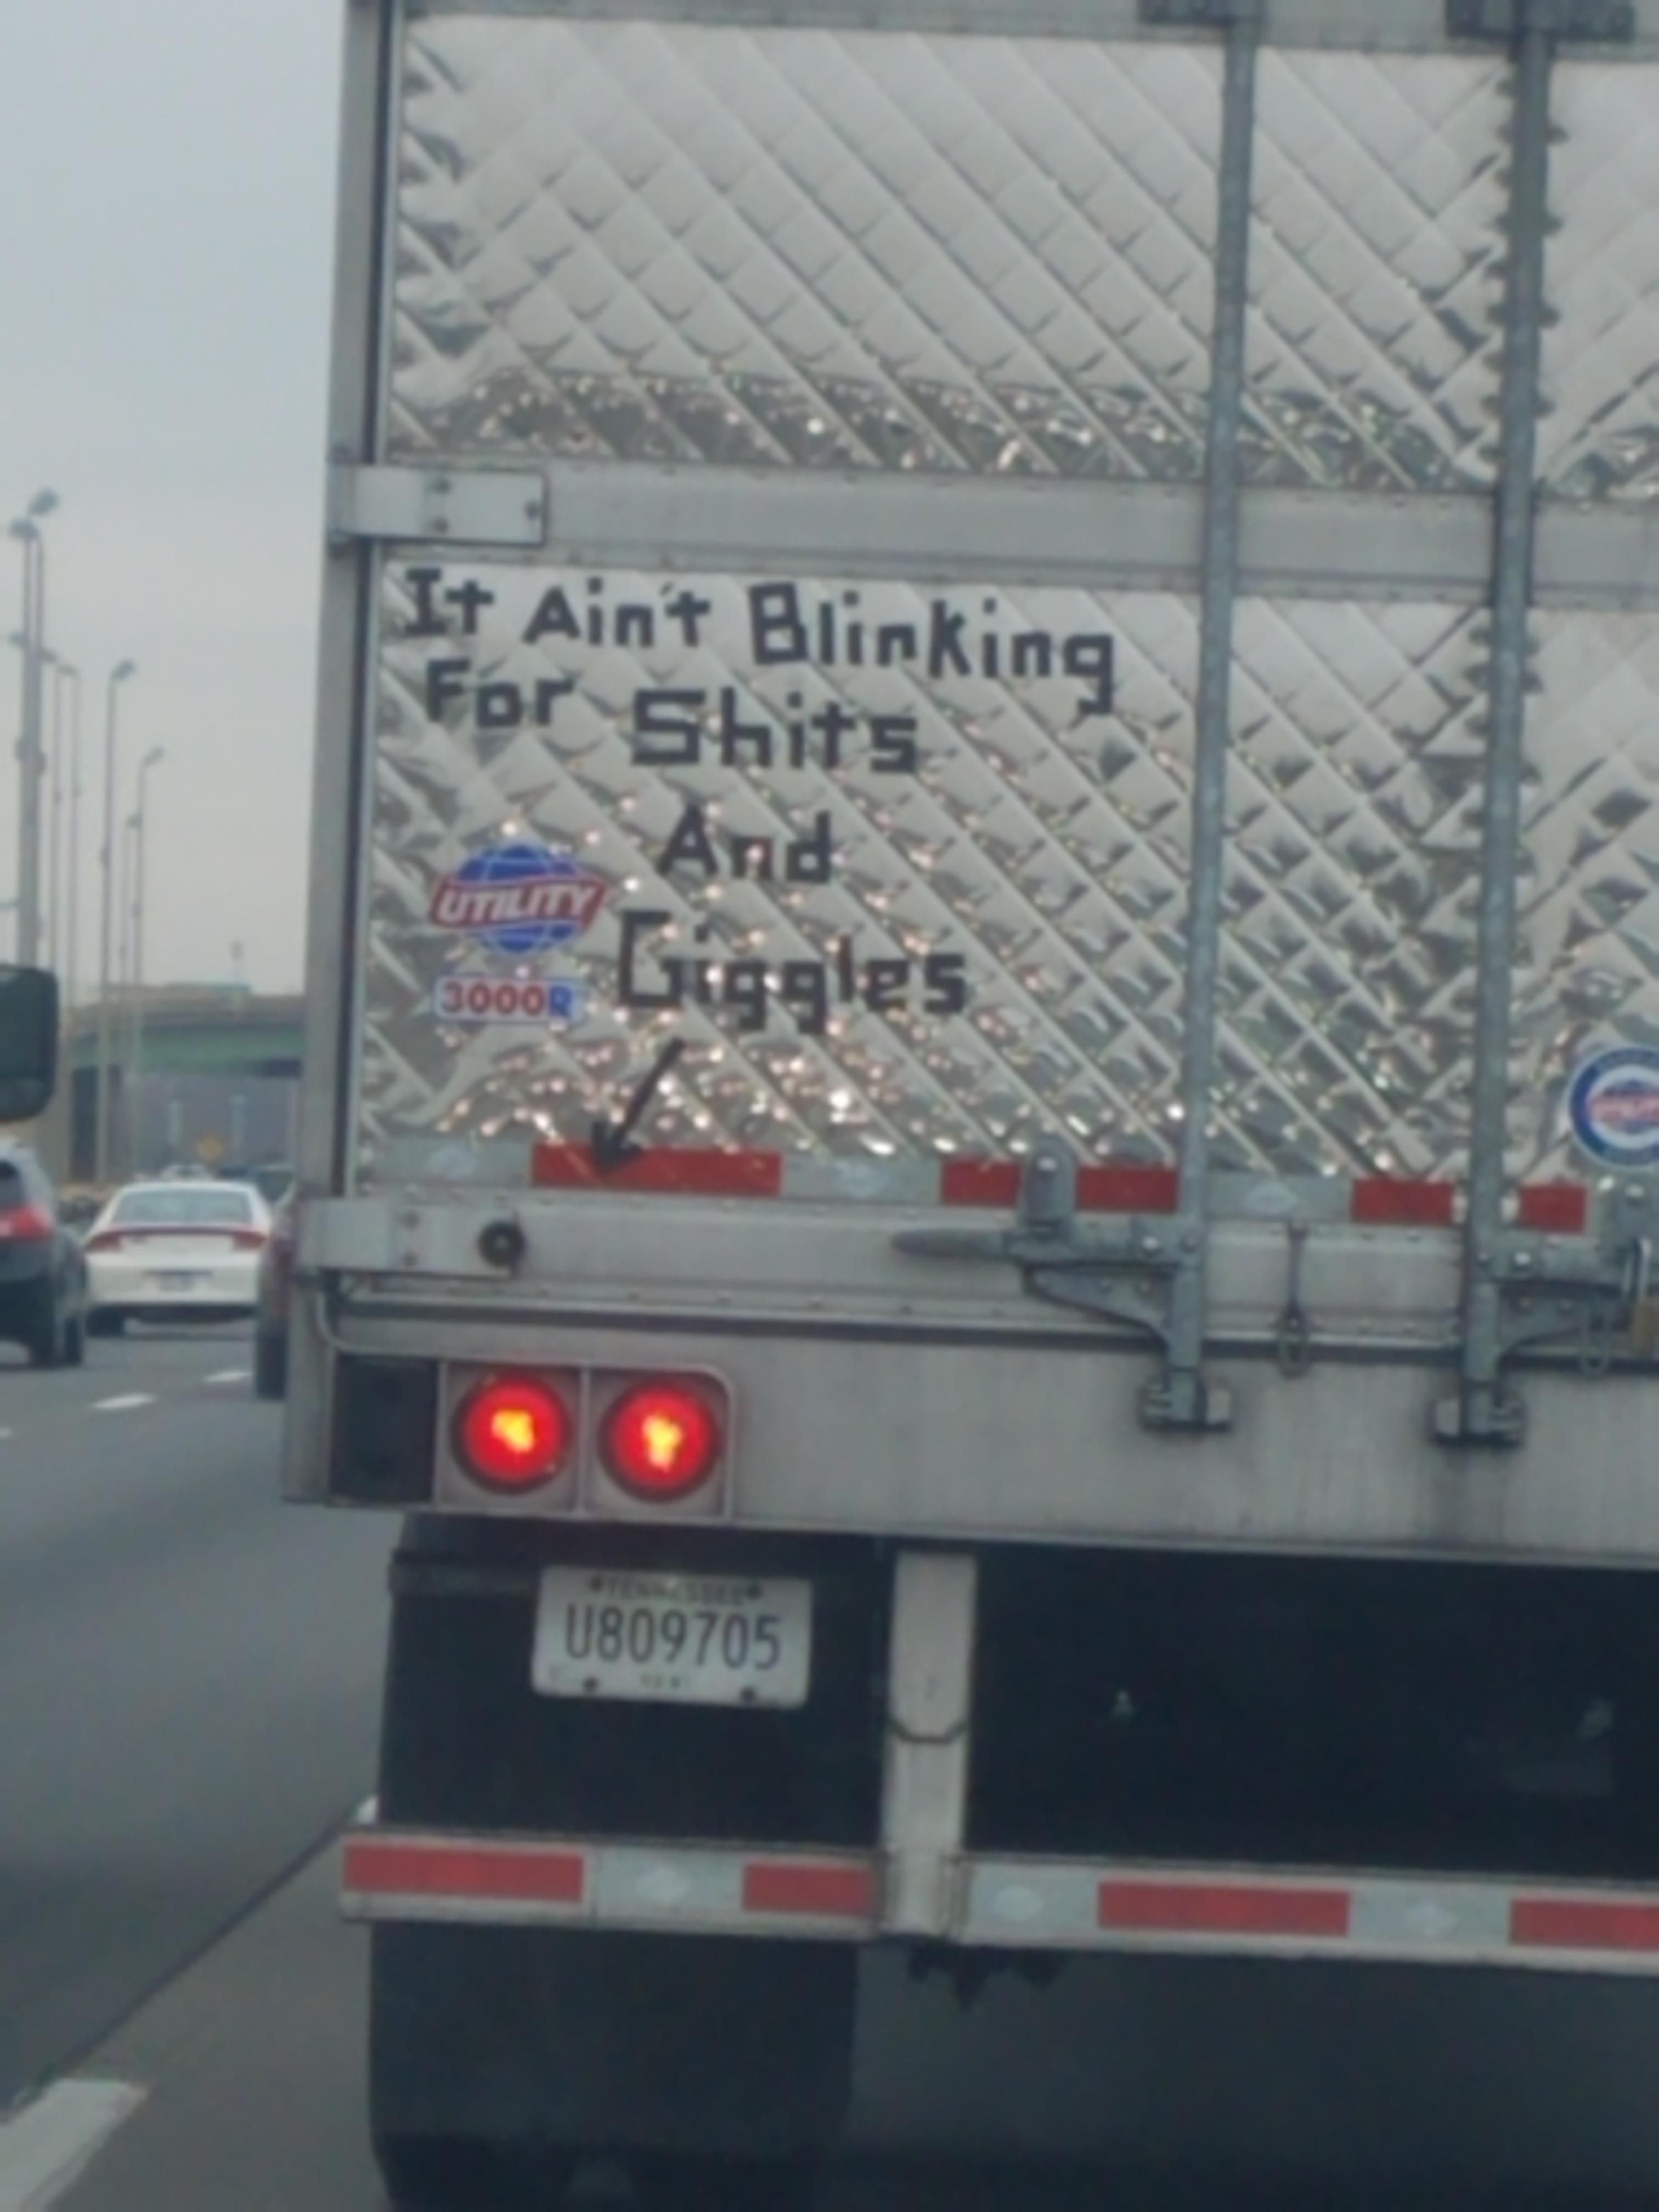 I-95 never disappoints for gems like this one